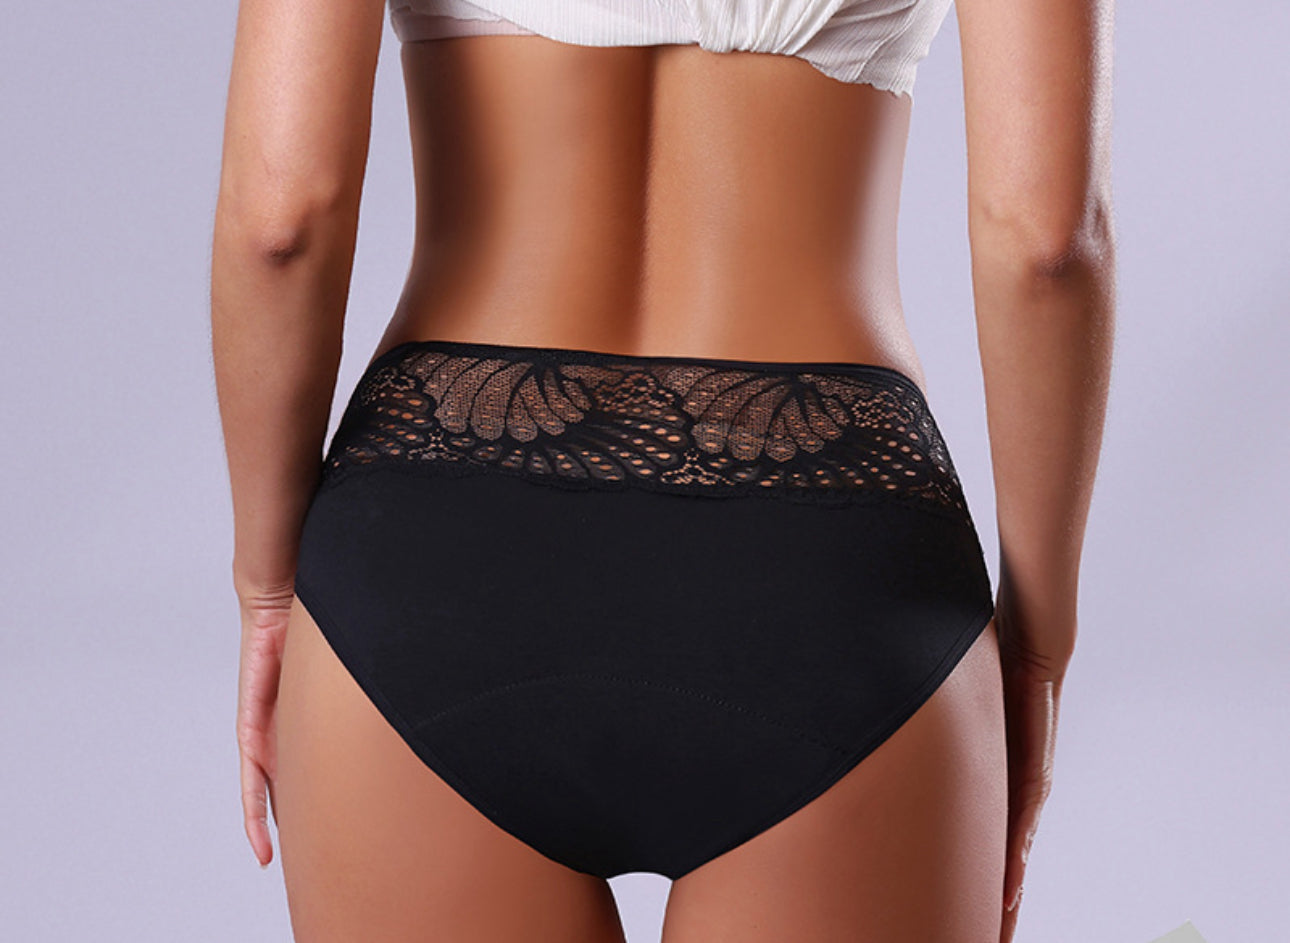 The Daisy Lacy Back Period Lingerie